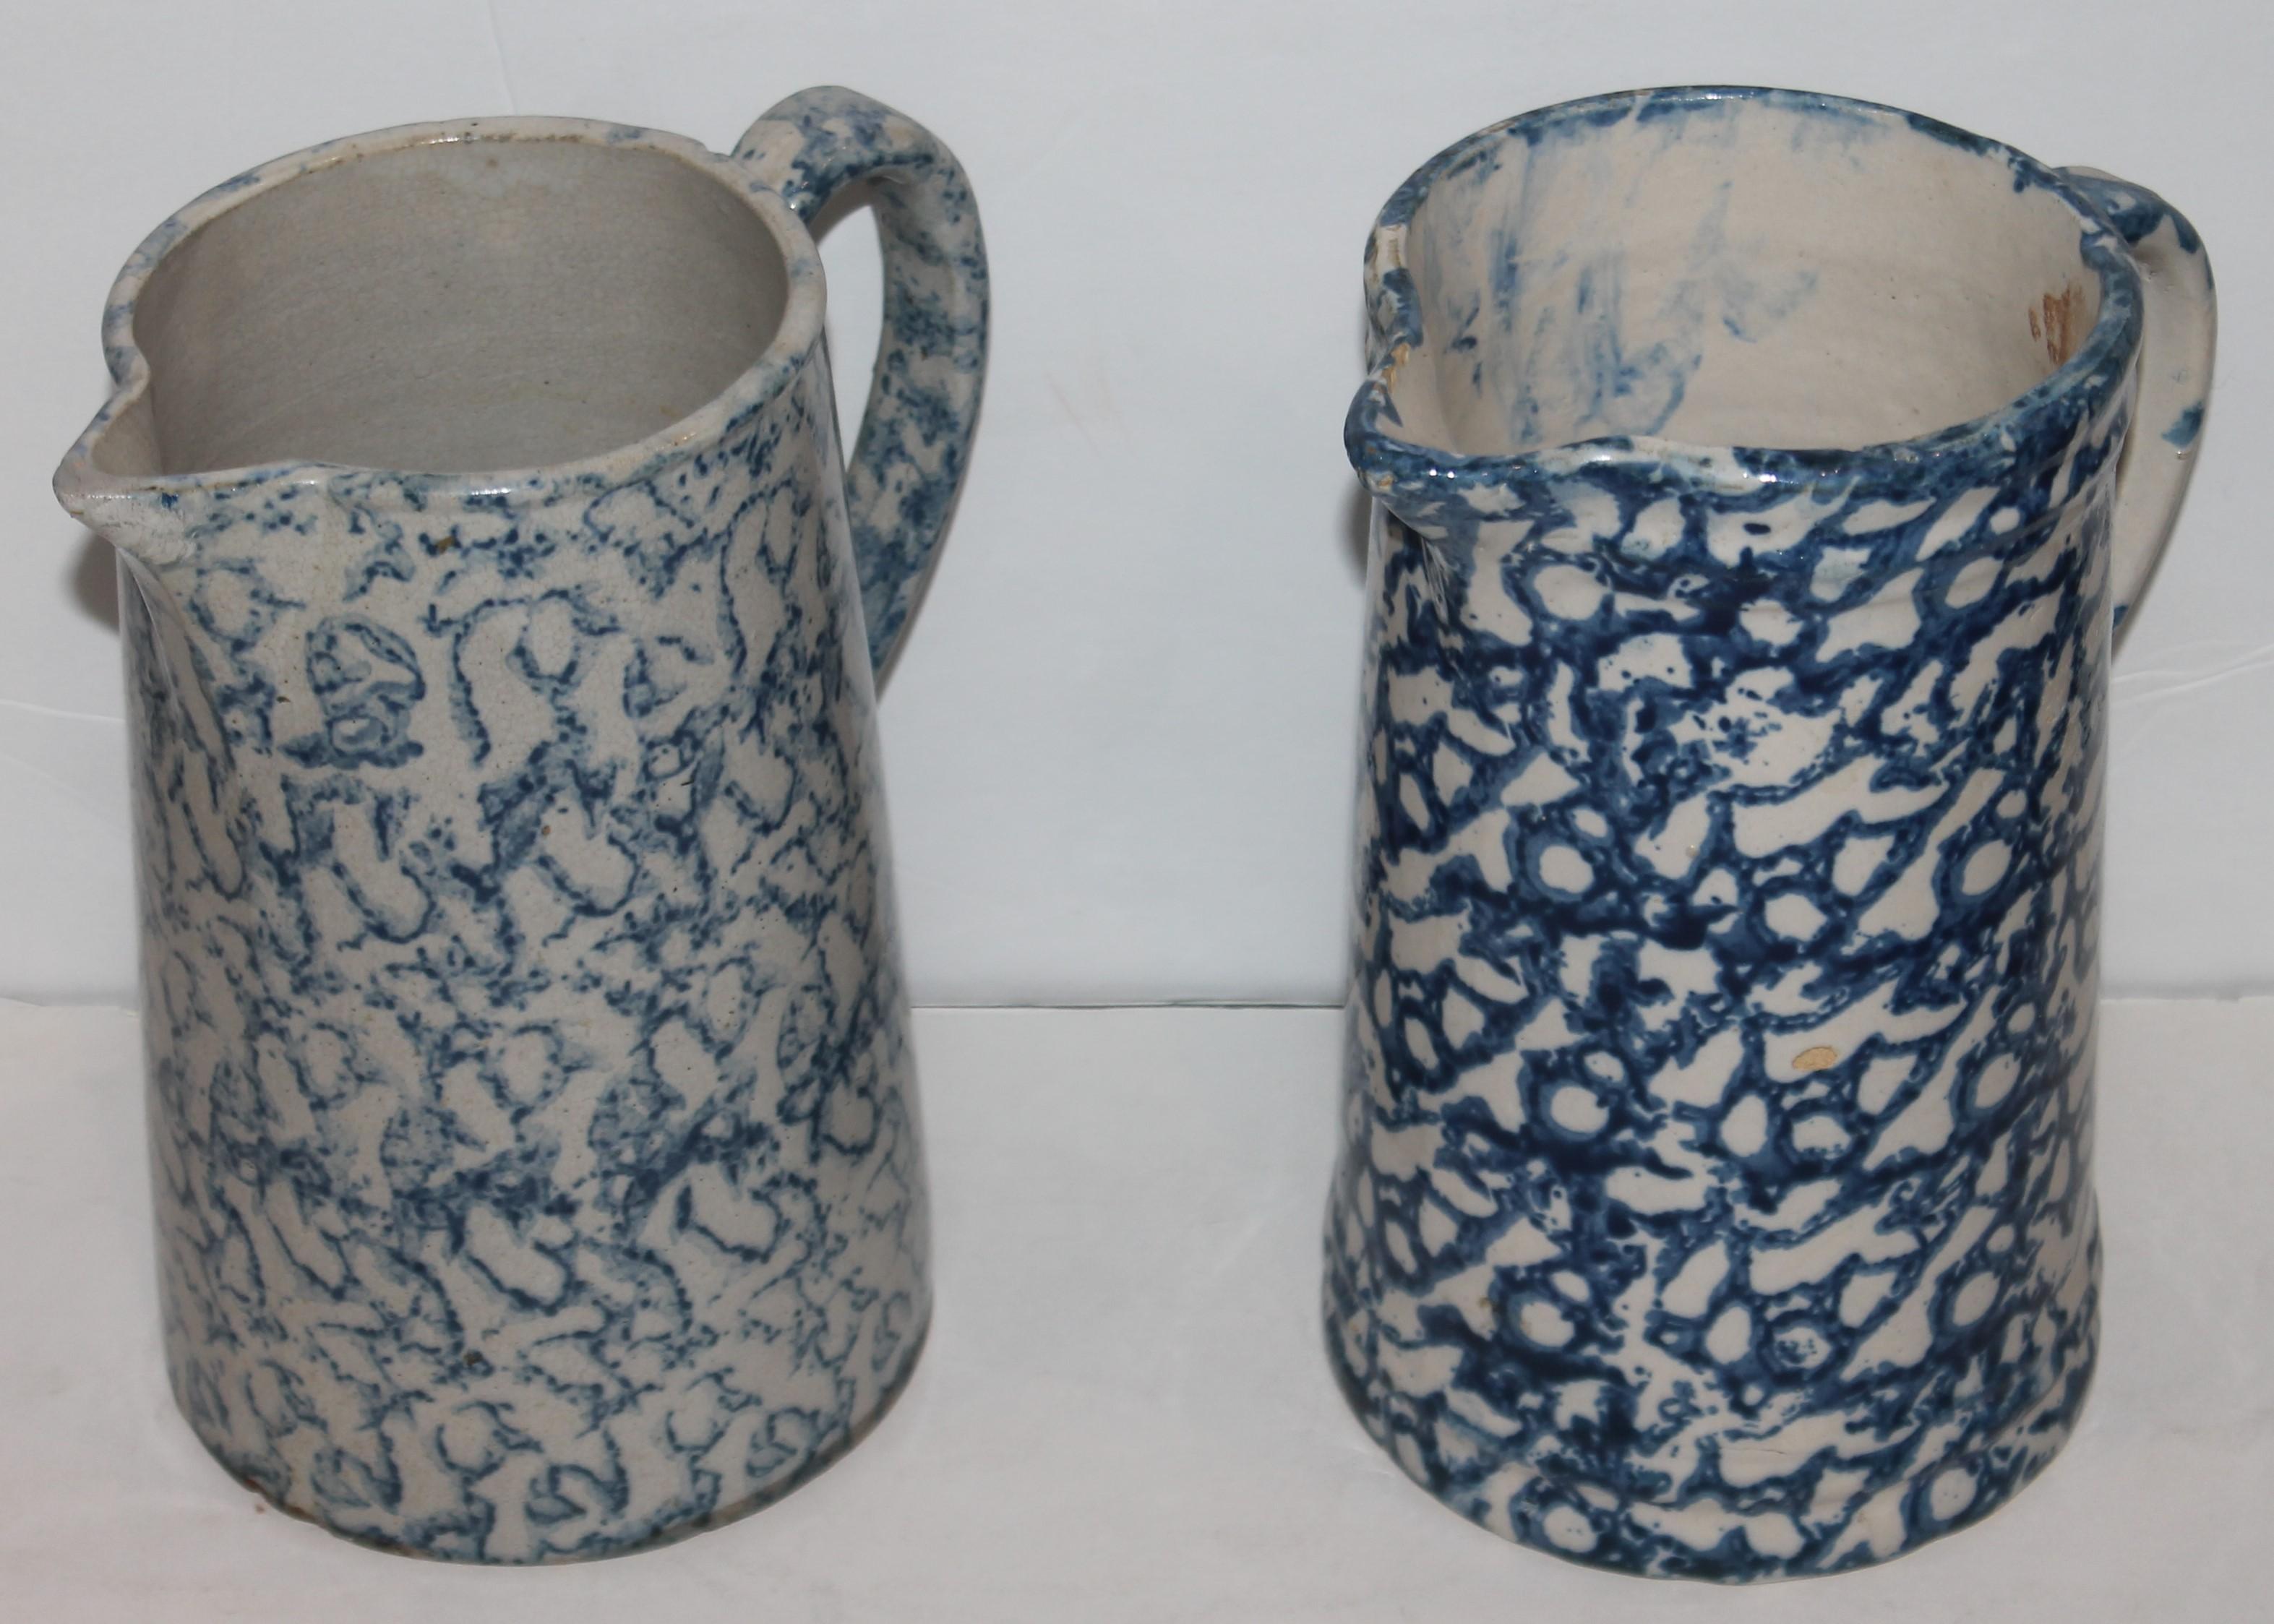 American Collection of 19th Century Sponge Ware Pottery Pitchers-4